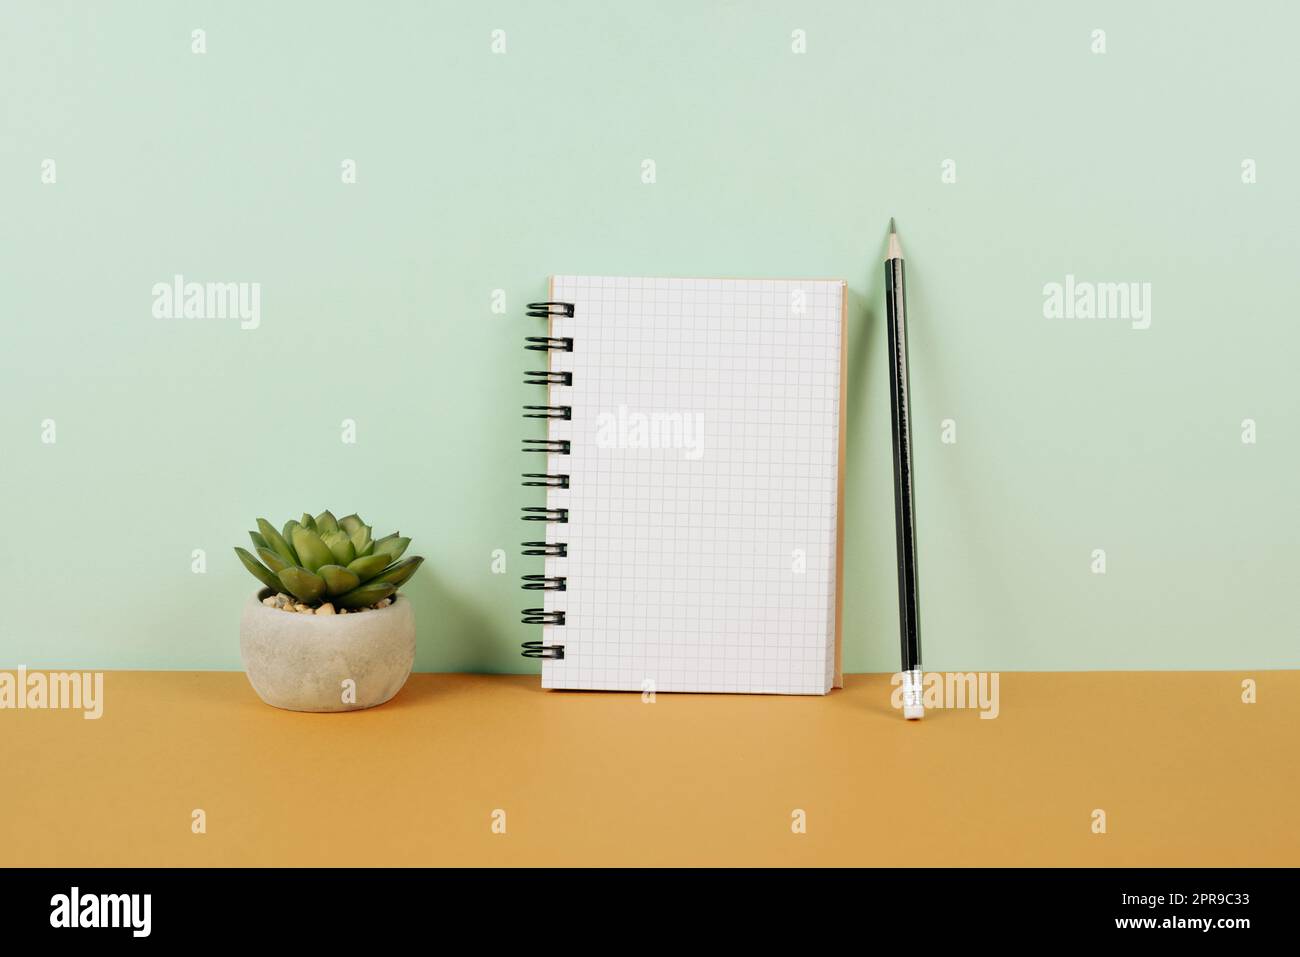 Empty notebook with a pen, eyeglasses and a cactus on an autumn colored background, brainstorming for new ideas, writing a message, taking a break, home office desk Stock Photo